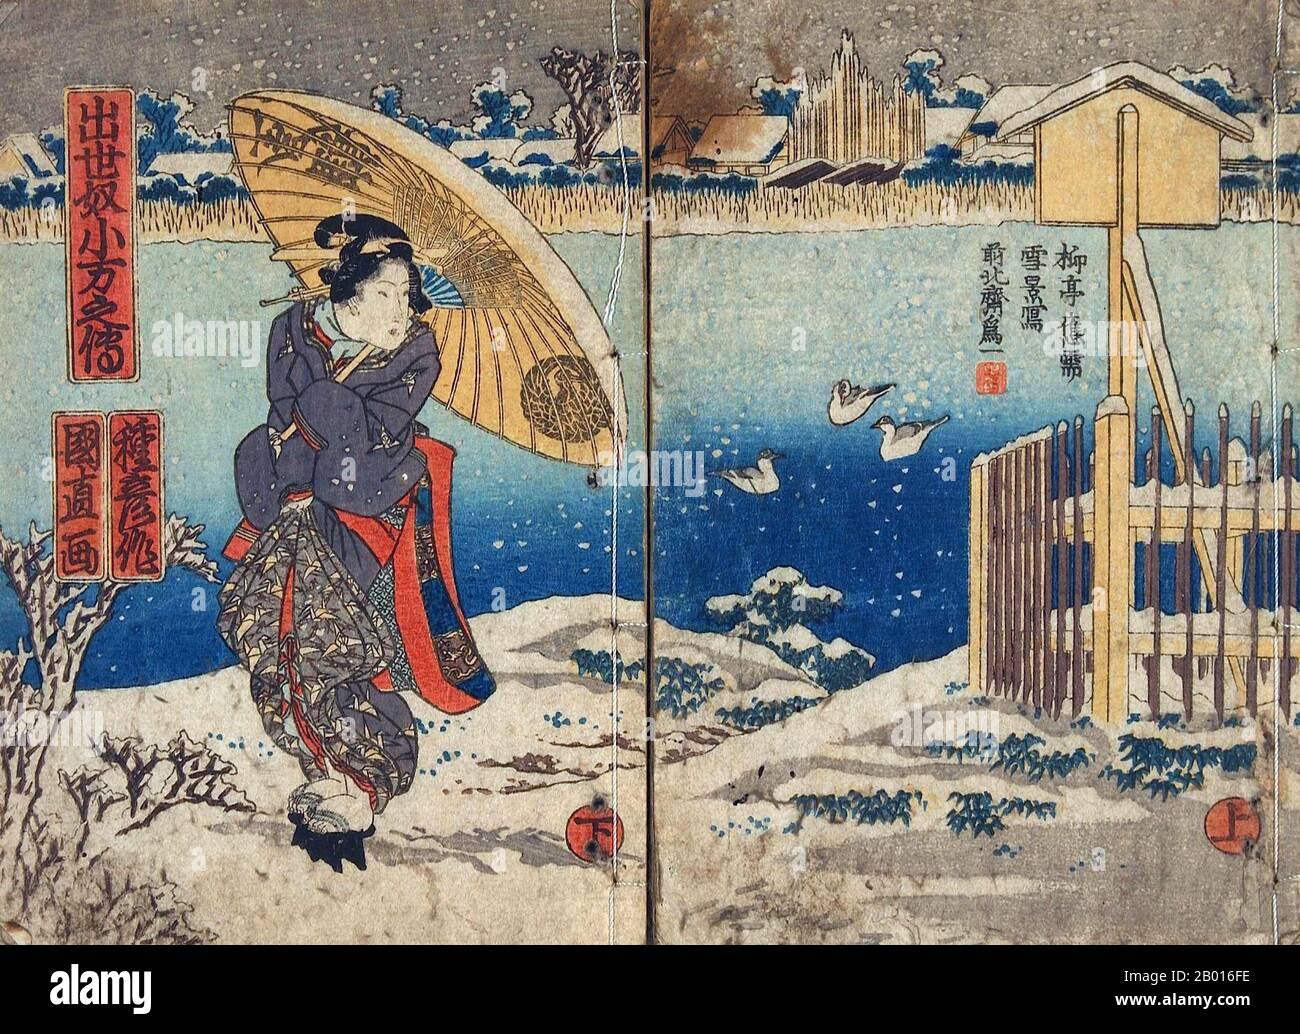 Japan: 'Lady and Duckpond in the Snow'. Ukiyo-e woodblock print by Utagawa Tsuruya (fl. late 19th century), late 19th century.  The Utagawa school was a group of Japanese woodblock print artists, founded by Toyoharu. His pupil, Toyokuni I, took over after Toyoharu's death and raised the group to become the most famous and powerful woodblock print school for the remainder of the 19th century. Hiroshige, Kunisada, Kuniyoshi and Yoshitoshi were Utagawa students. The school became so successful and well-known that today more than half of all surviving ukiyo-e prints are from it. Stock Photo